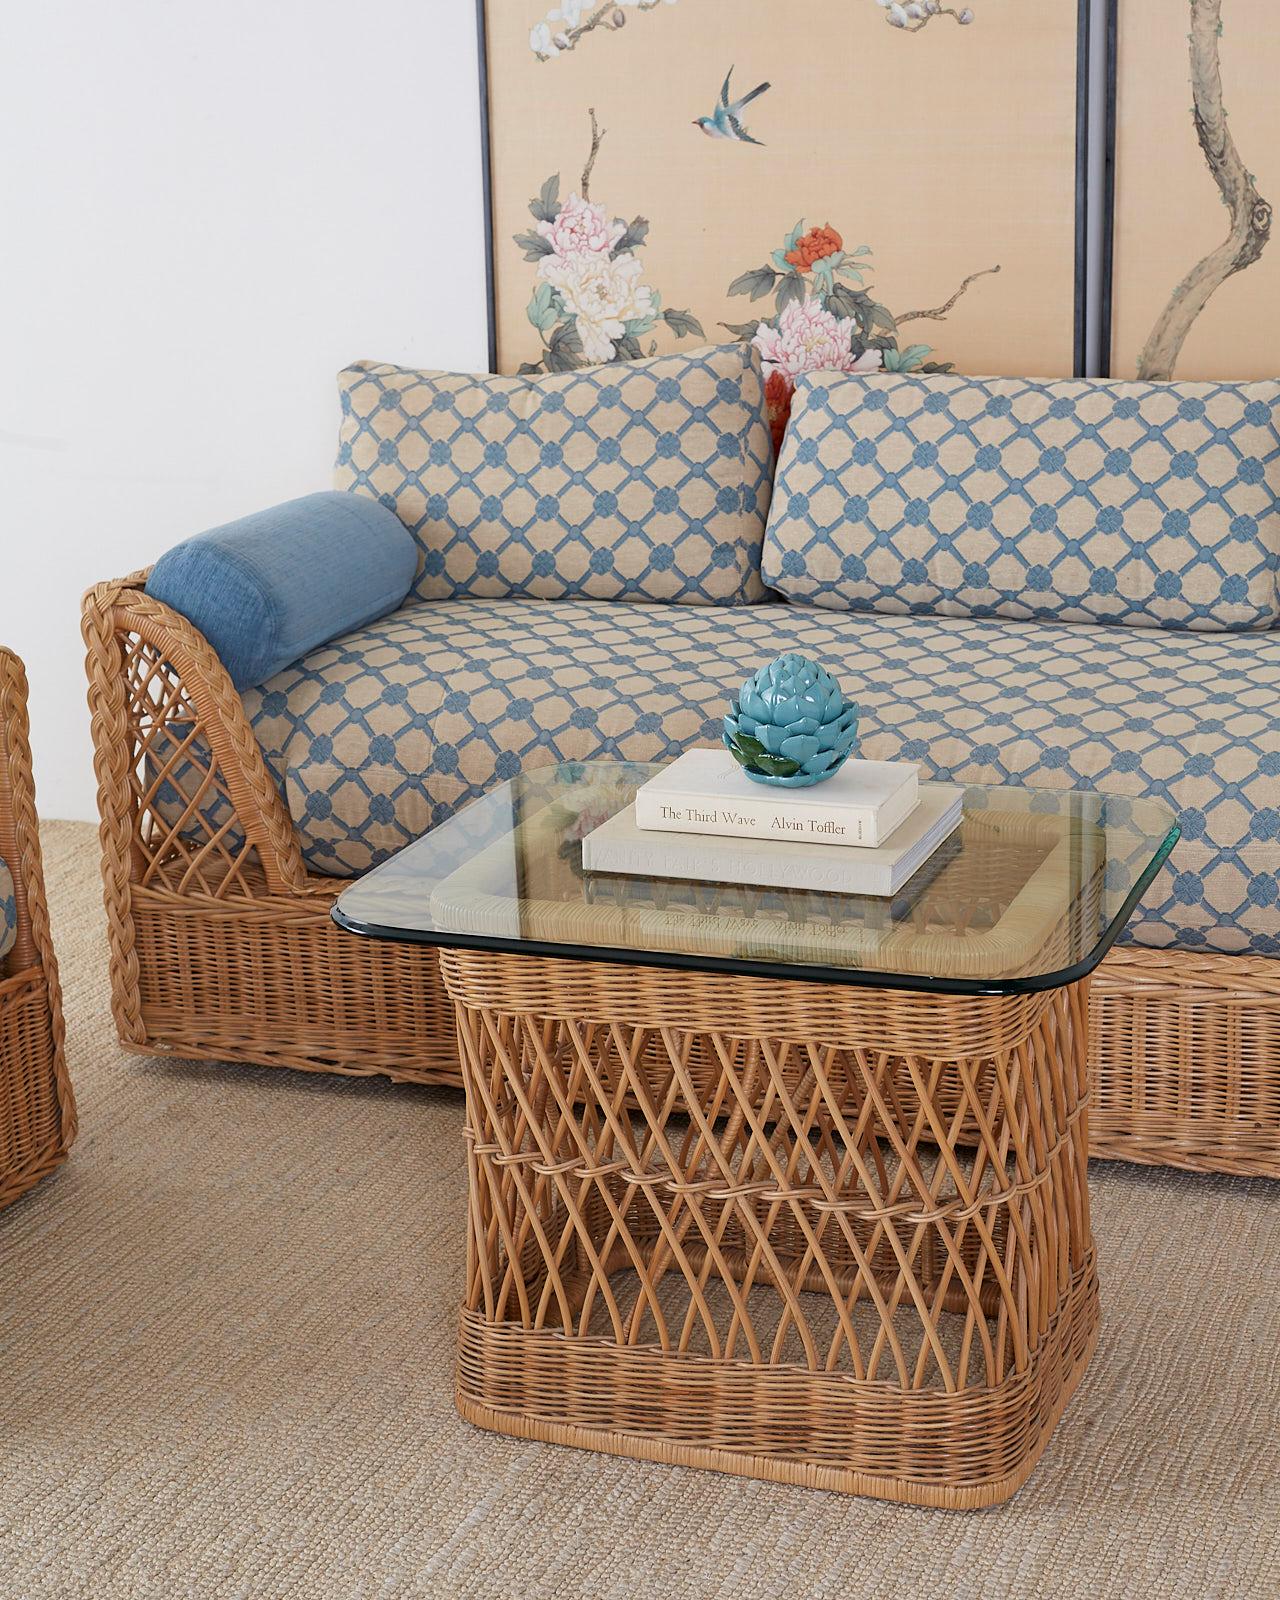 Organic modern style coffee cocktail table made by McGuire featuring a woven rattan wicker frame topped with a thick pane of glass. The glass top has rounded corners and an ogee edge. The base has a decorative open fretwork geometric design grounded